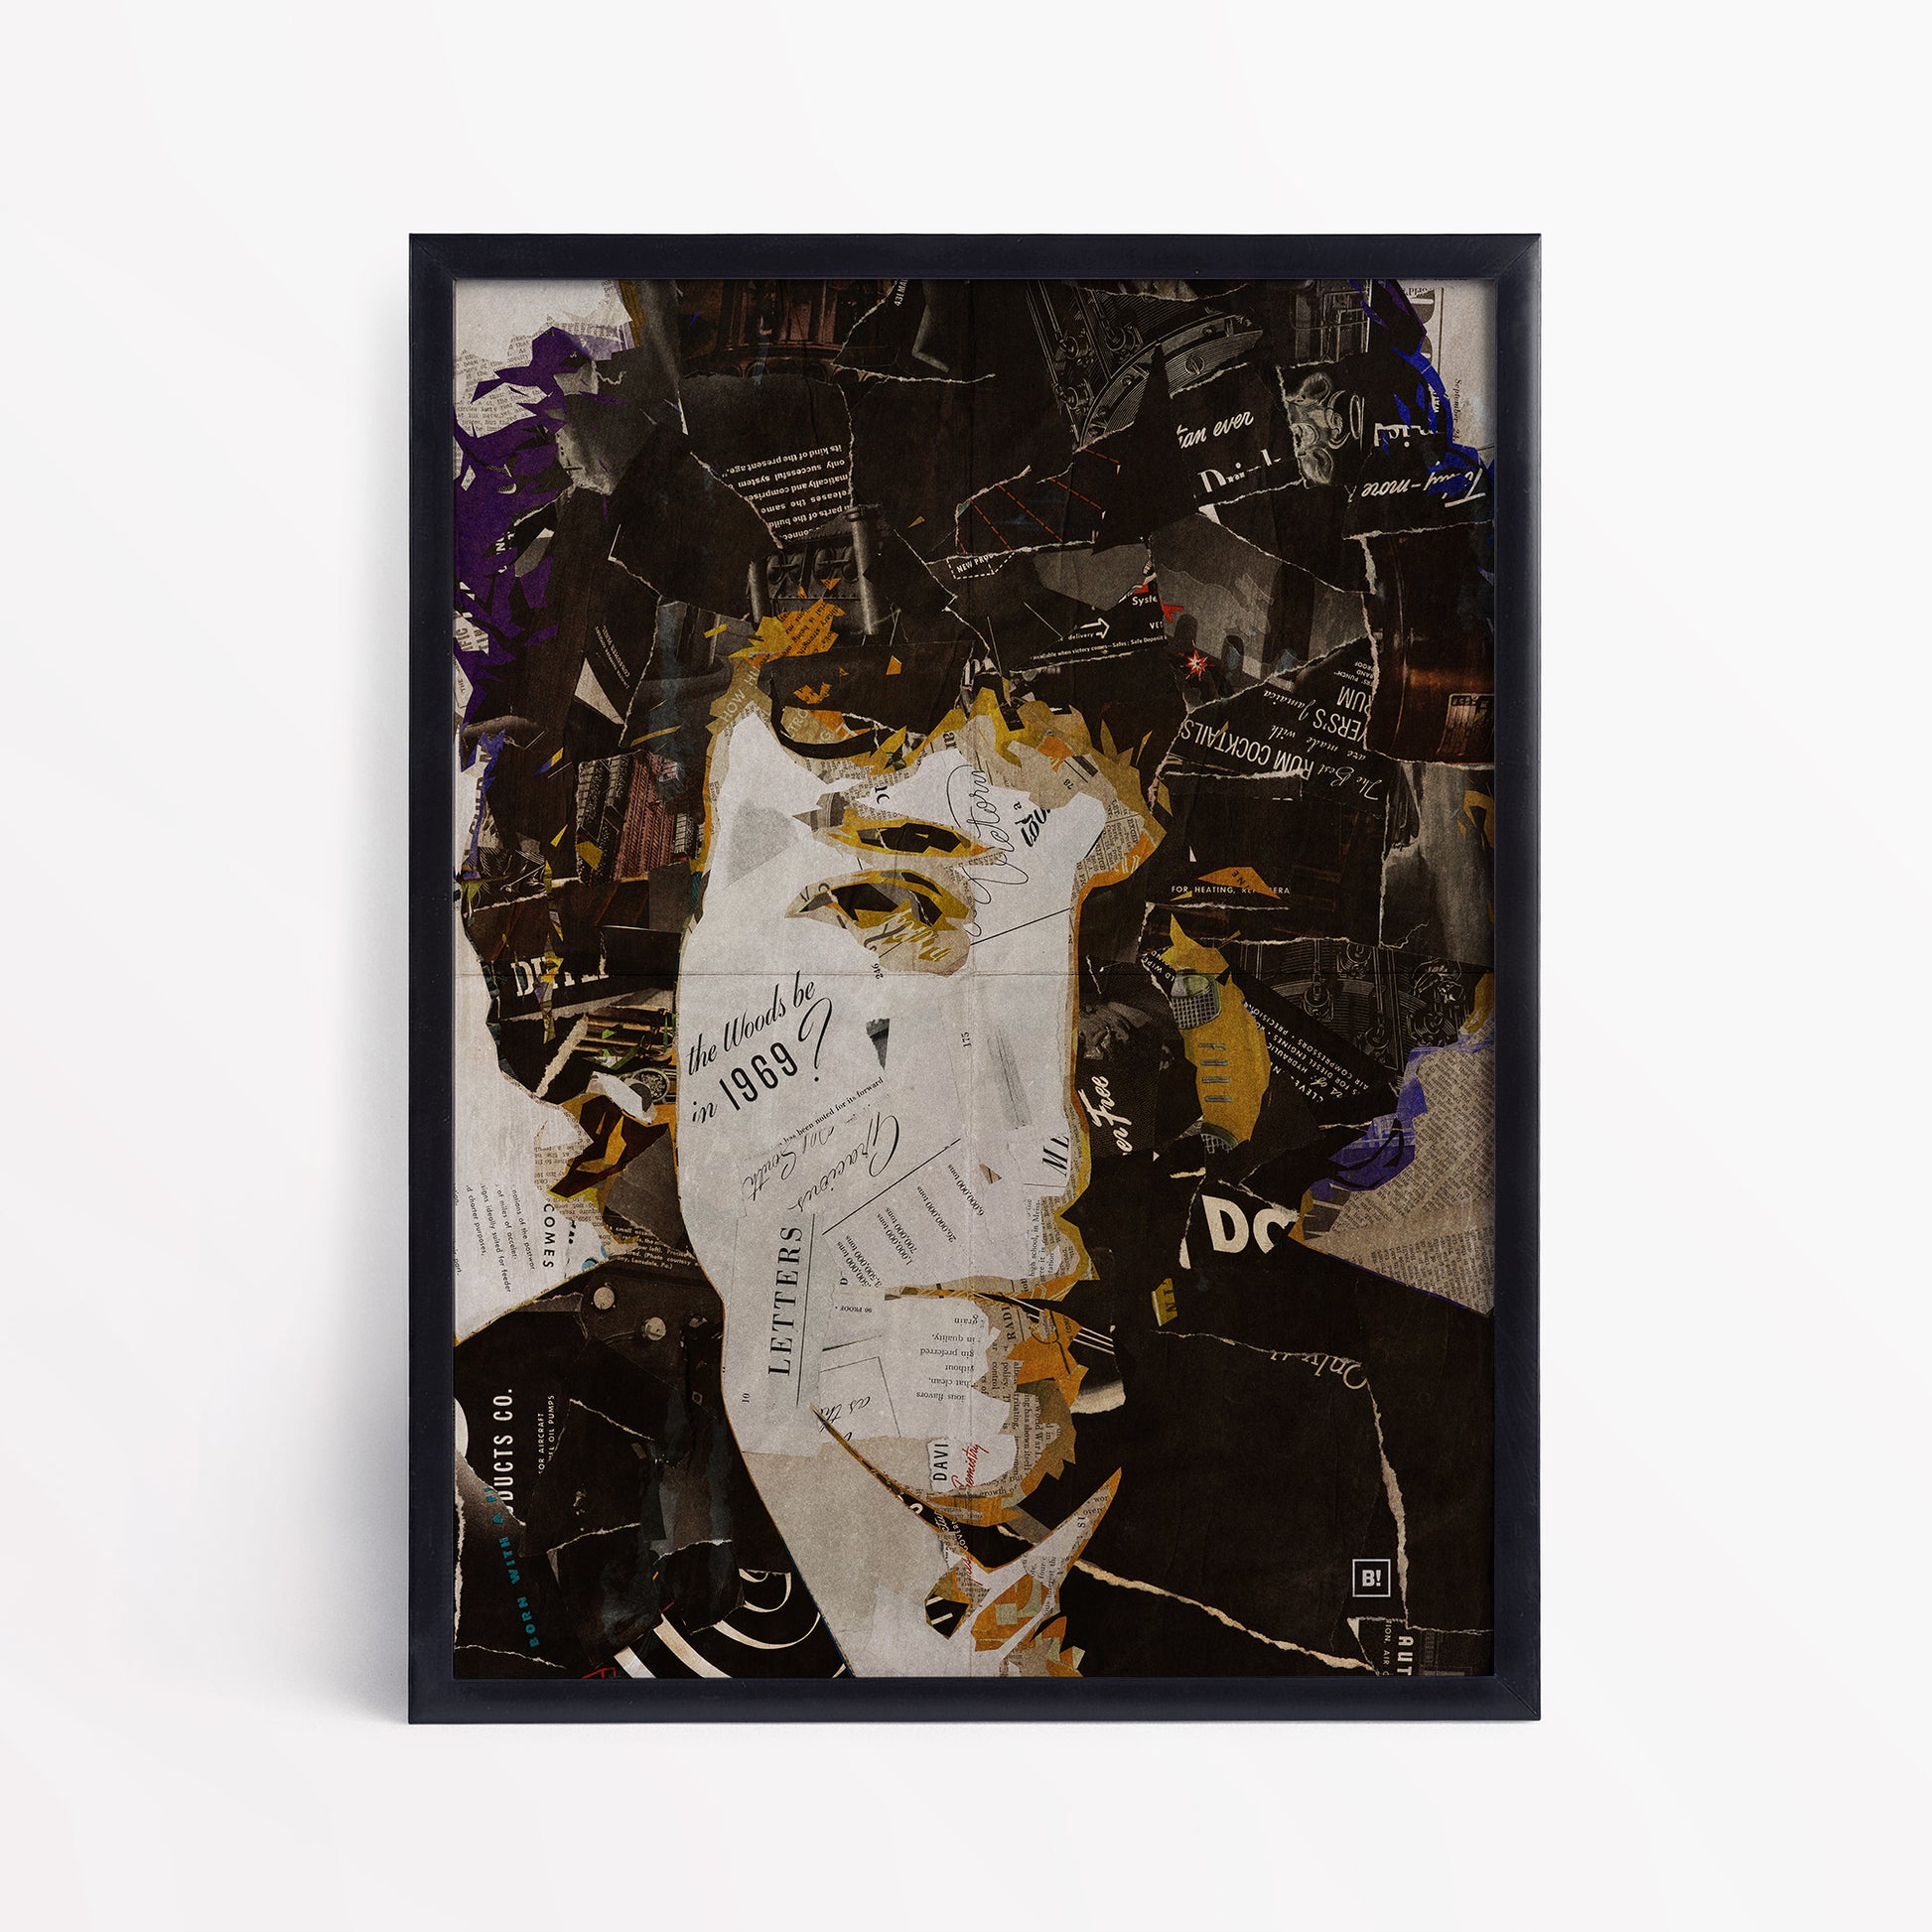 Be inspired by our iconic collage portrait art print of Bob Dylan. This artwork has been printed using the giclée process on archival acid-free paper and is presented in a sleek black frame, showcasing its timeless beauty in every detail.